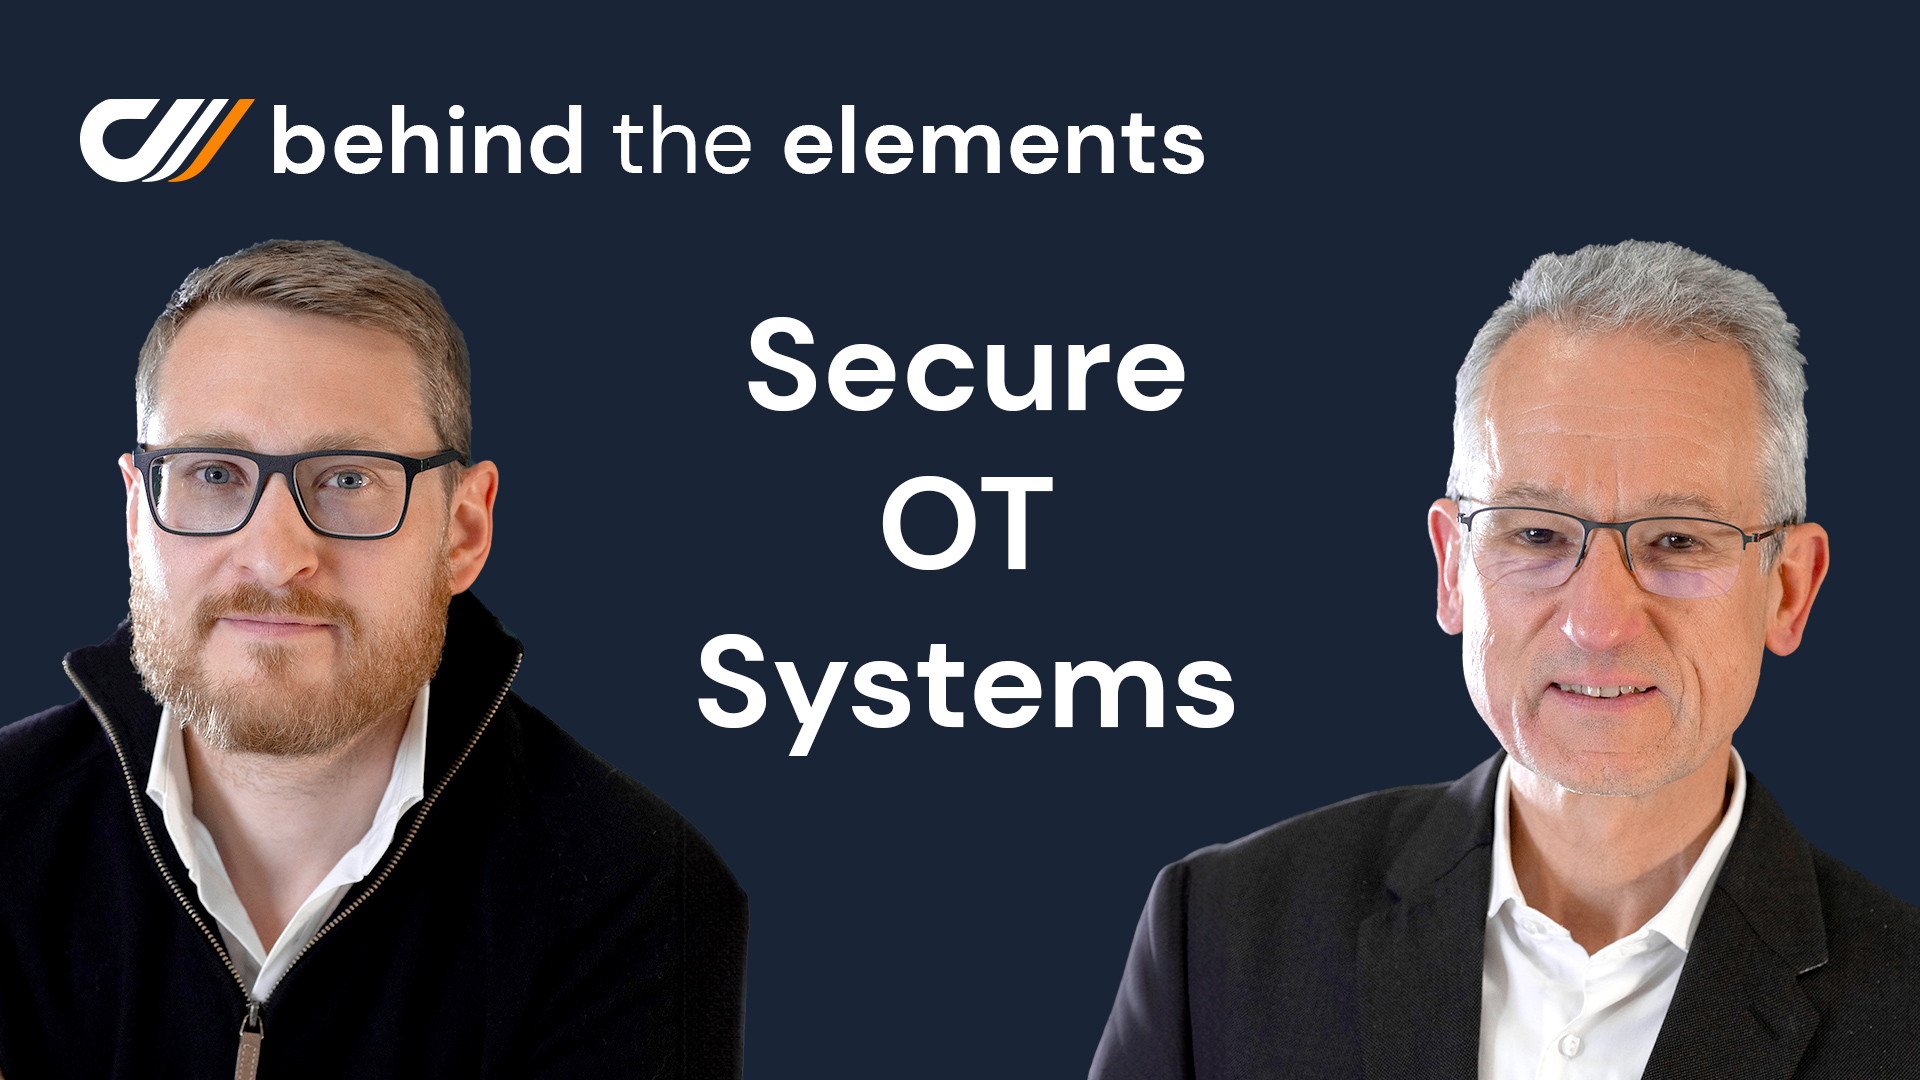 Secure OT Systems